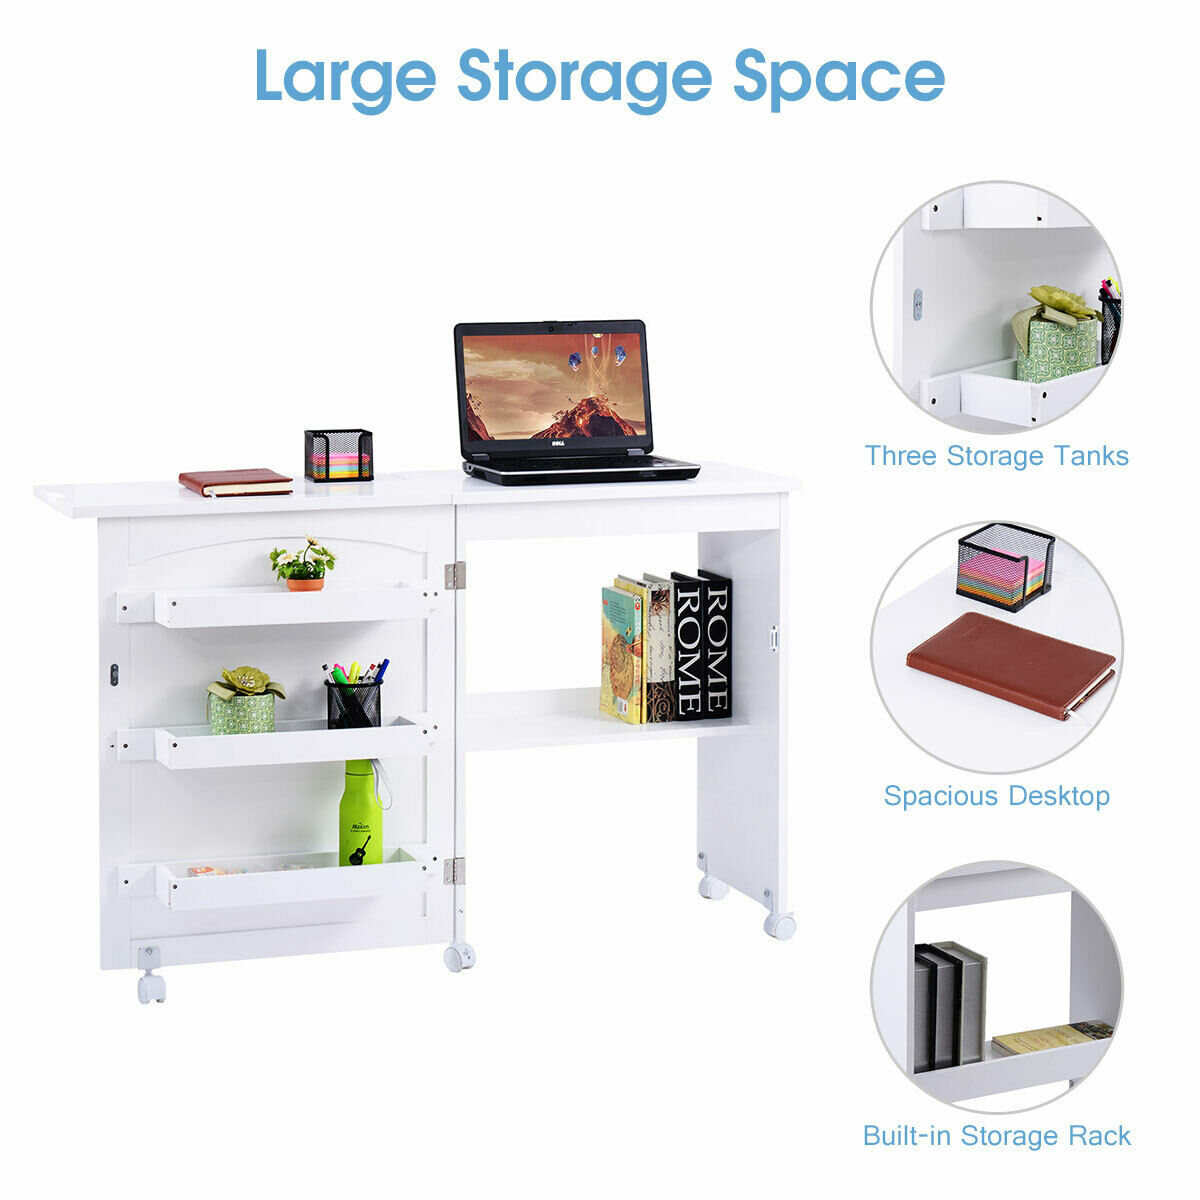 Folding Sewing Table with Storage Shelves and Lockable Casters-White